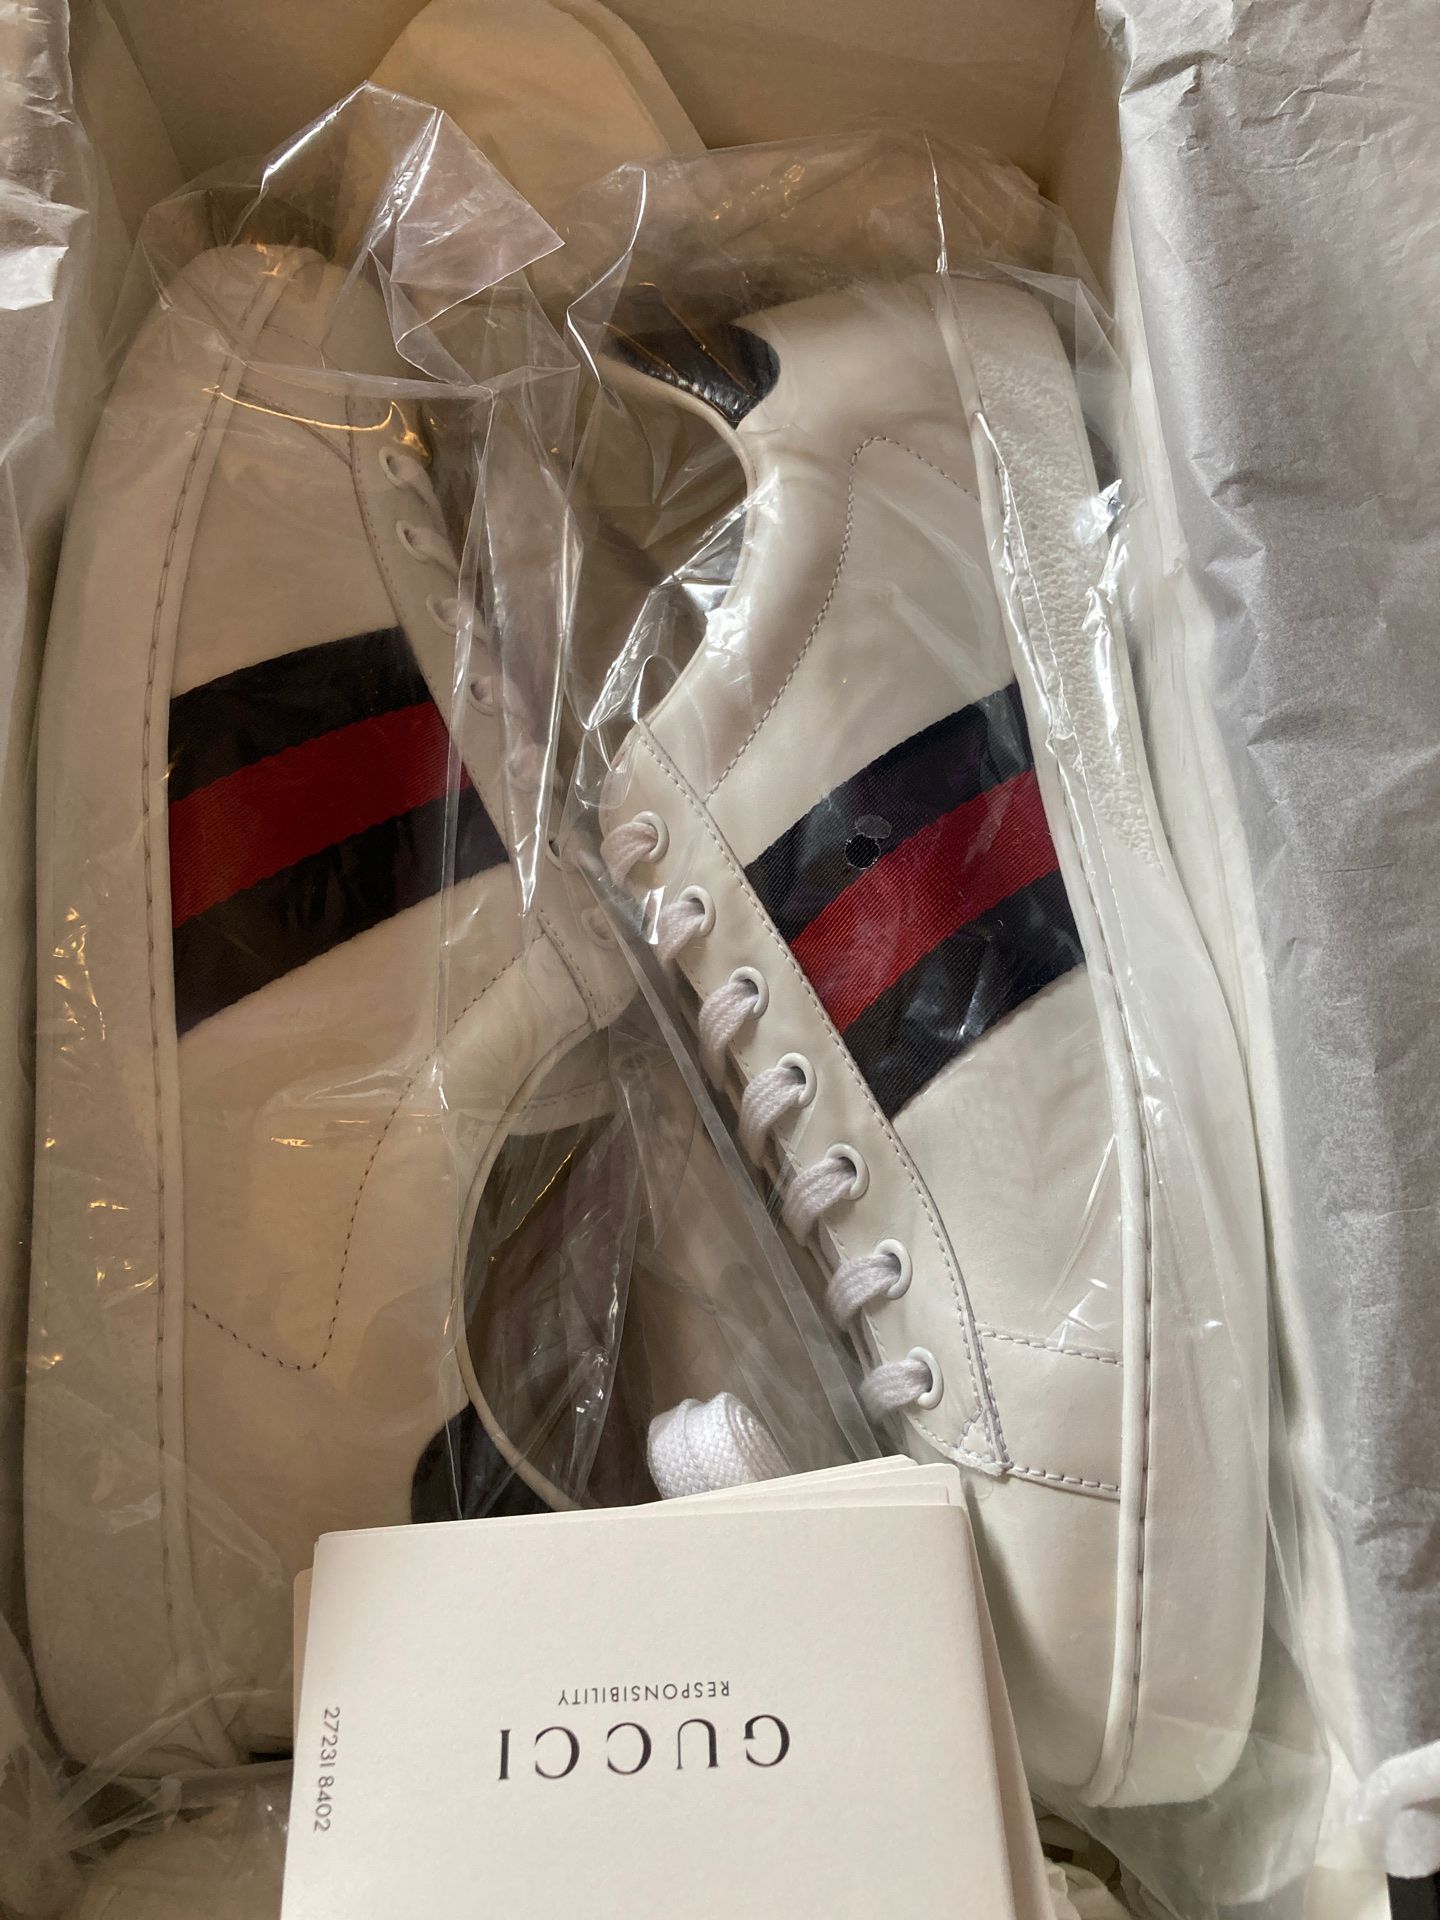 Gucci Ace Sneakers Size 10.5UK / 11 US Brand New DEADSTOCK